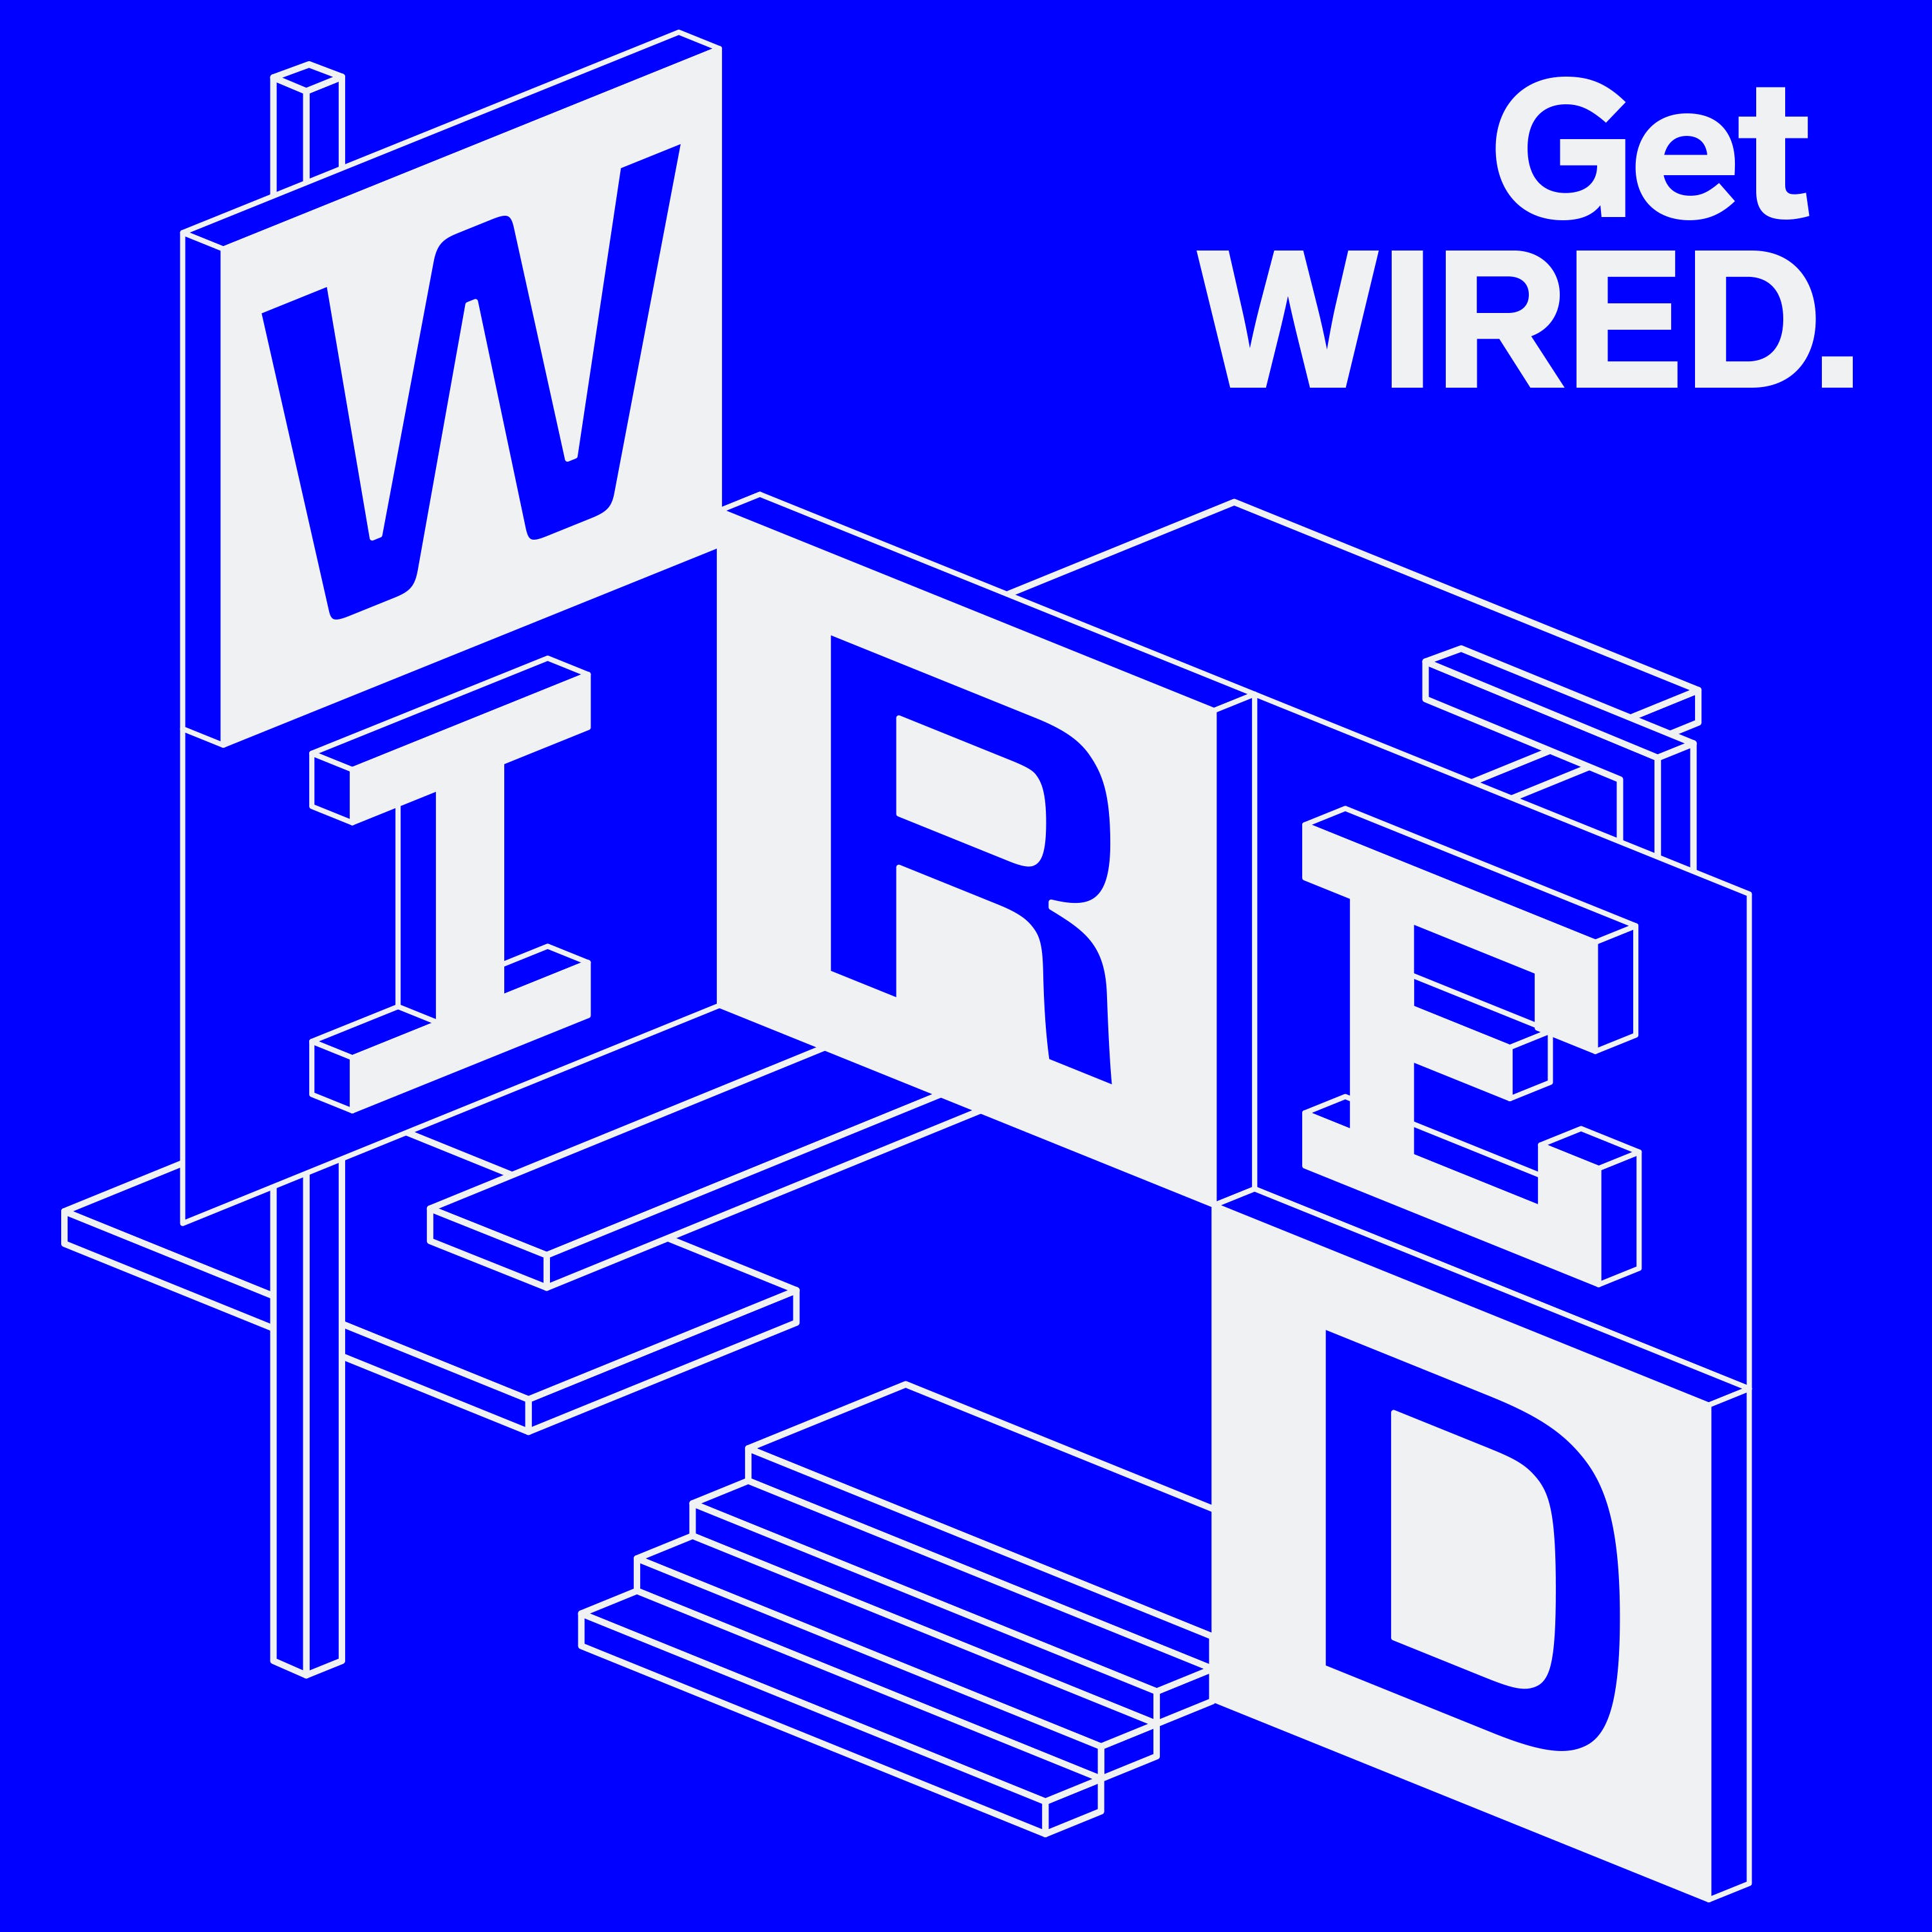 Introducing: Get WIRED